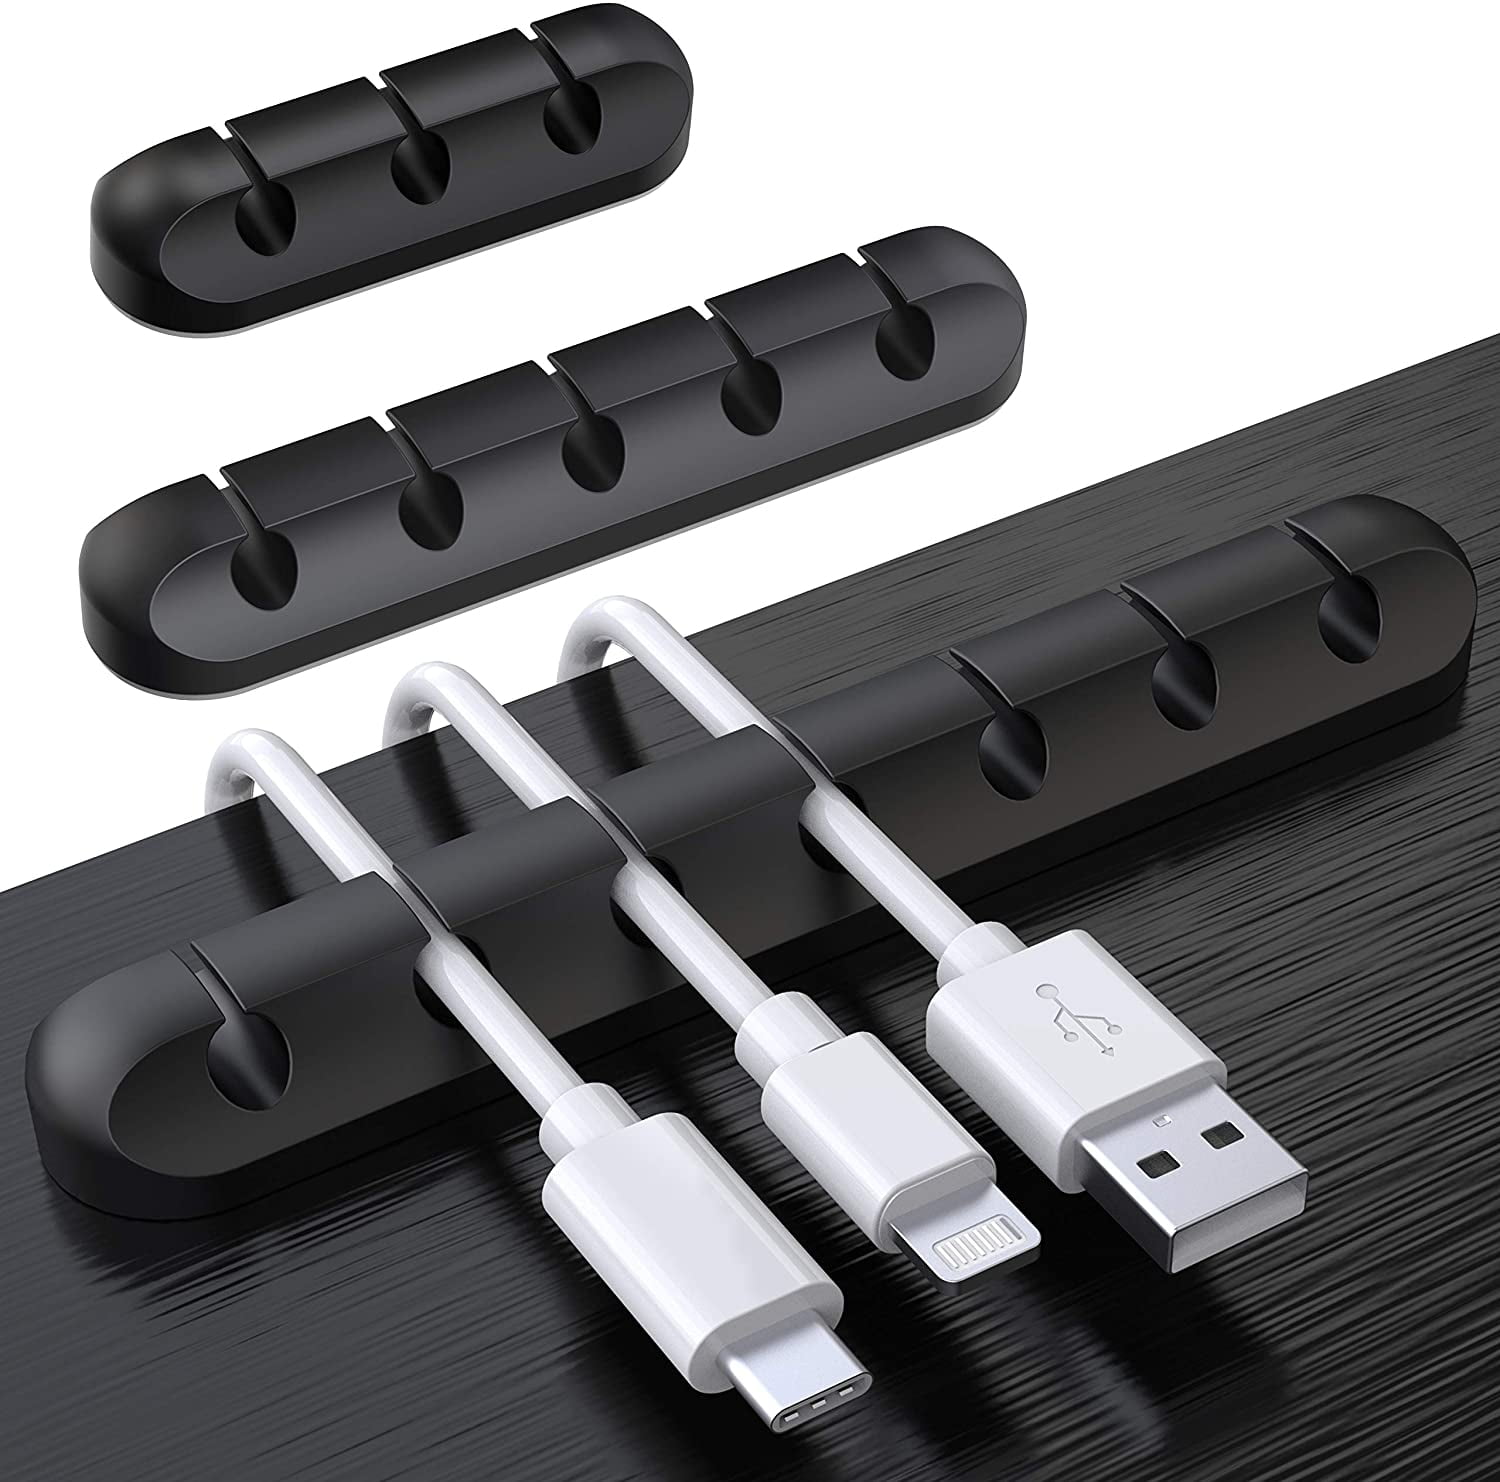 7 Slots 5 Slots and 3 Slots Cable Clips Cord Management Organizer 3 Packs Adhesive Hooks Wire Cord Holder for Power Cords and Charging Accessory Cables Mouse Cable PC Office and Home